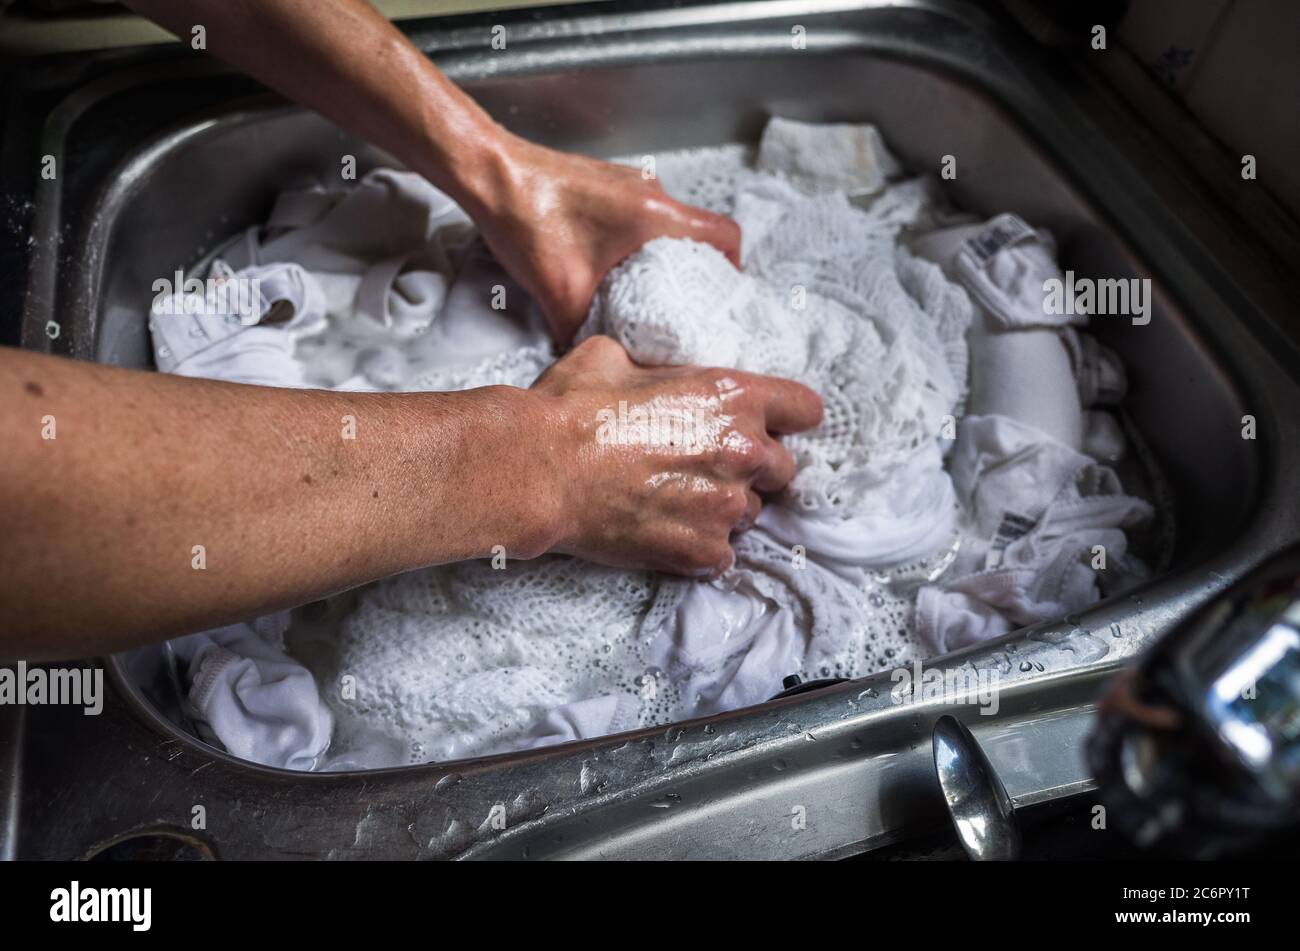 Washing laundry whites by hand in a chrome sink. Stock Photo